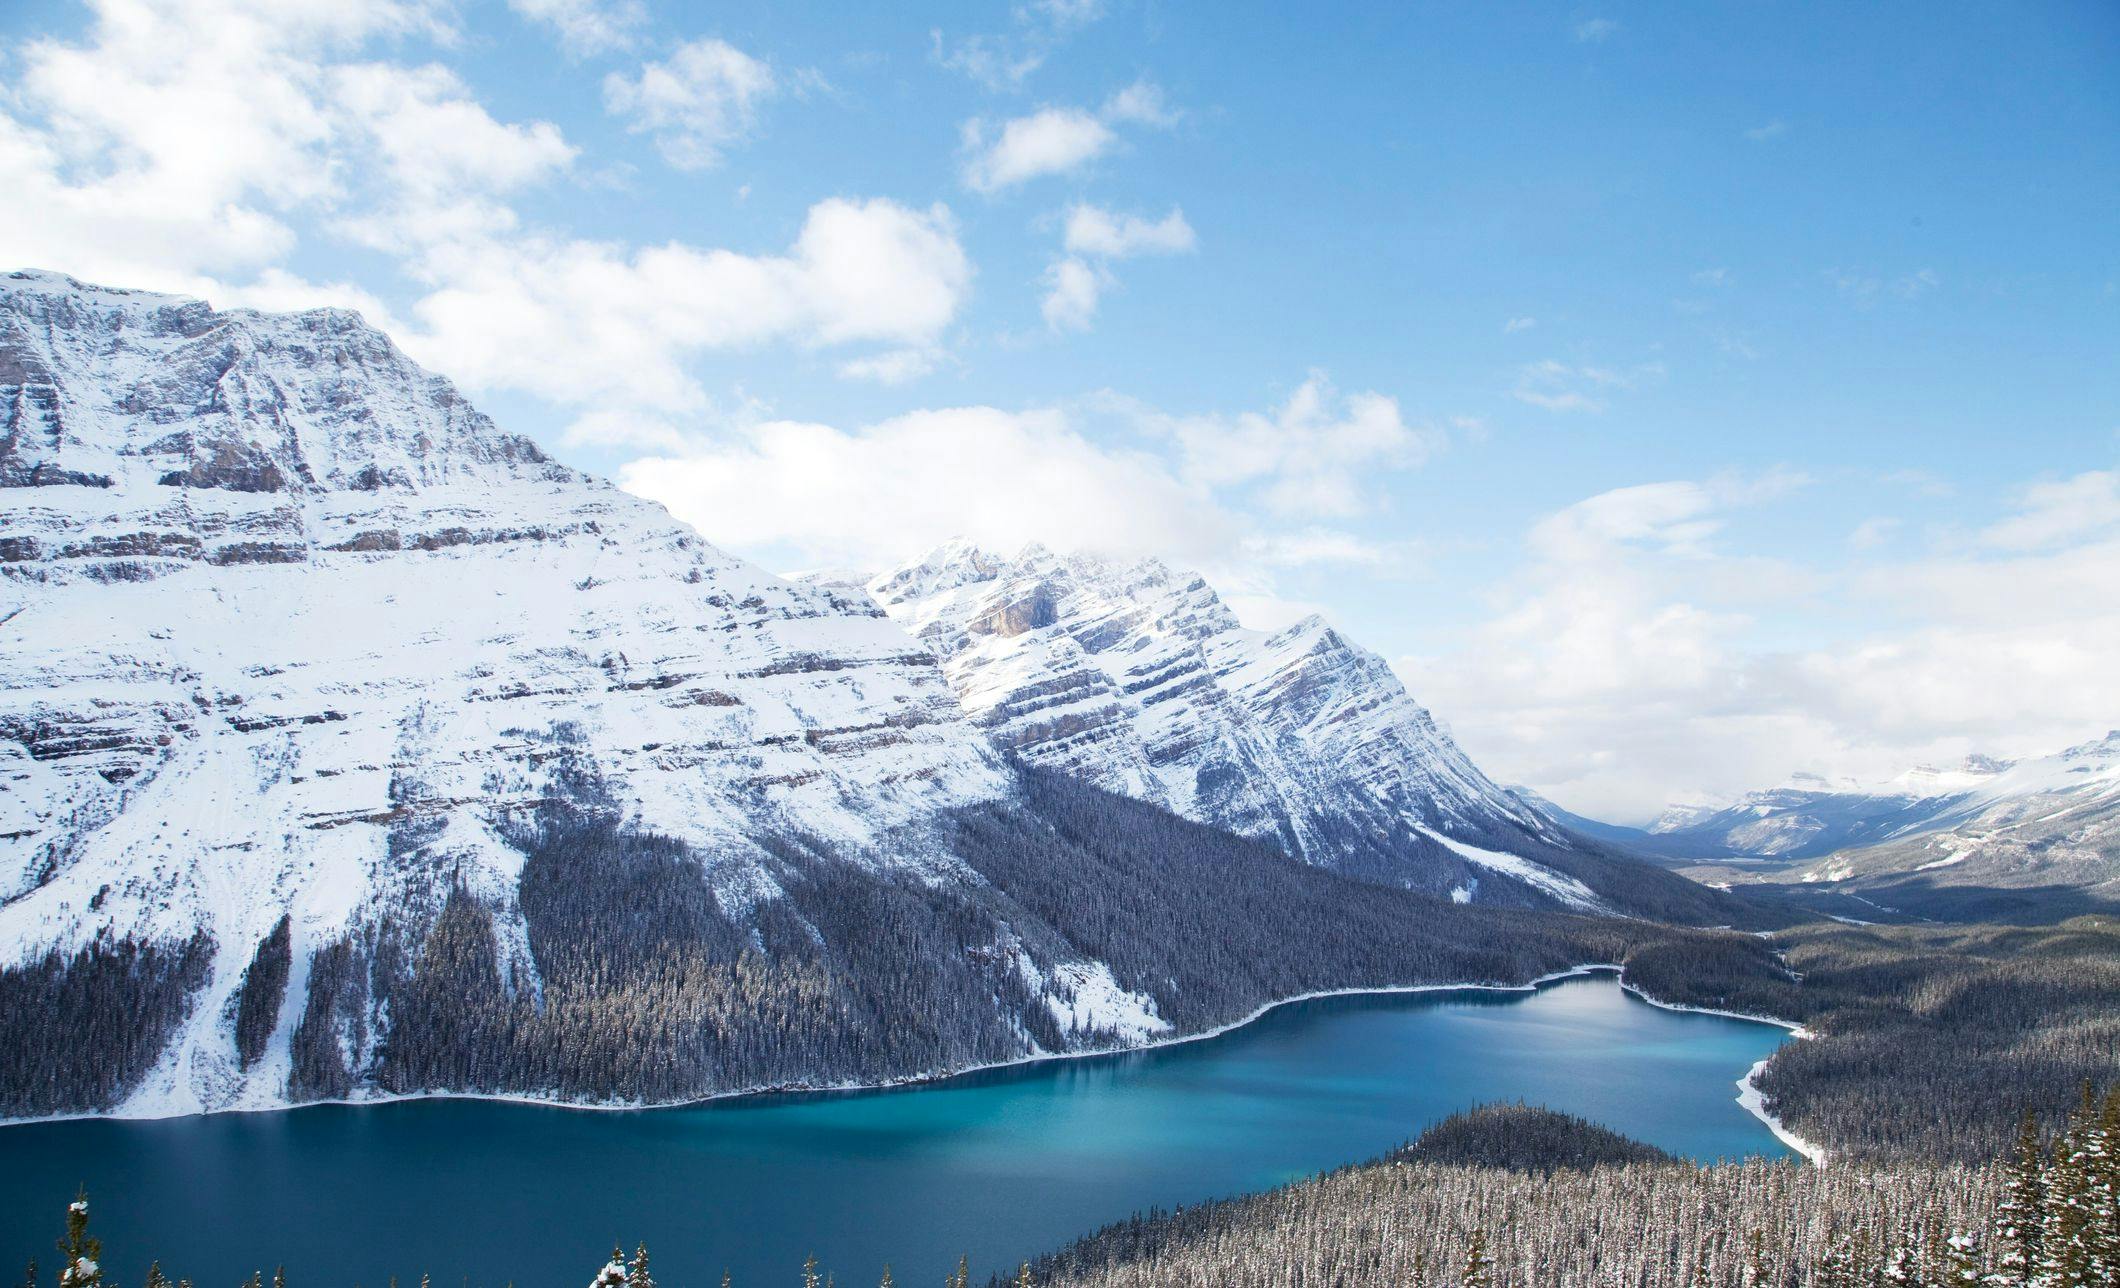 Peyto_Lake_Icefields_Parkway_Winter